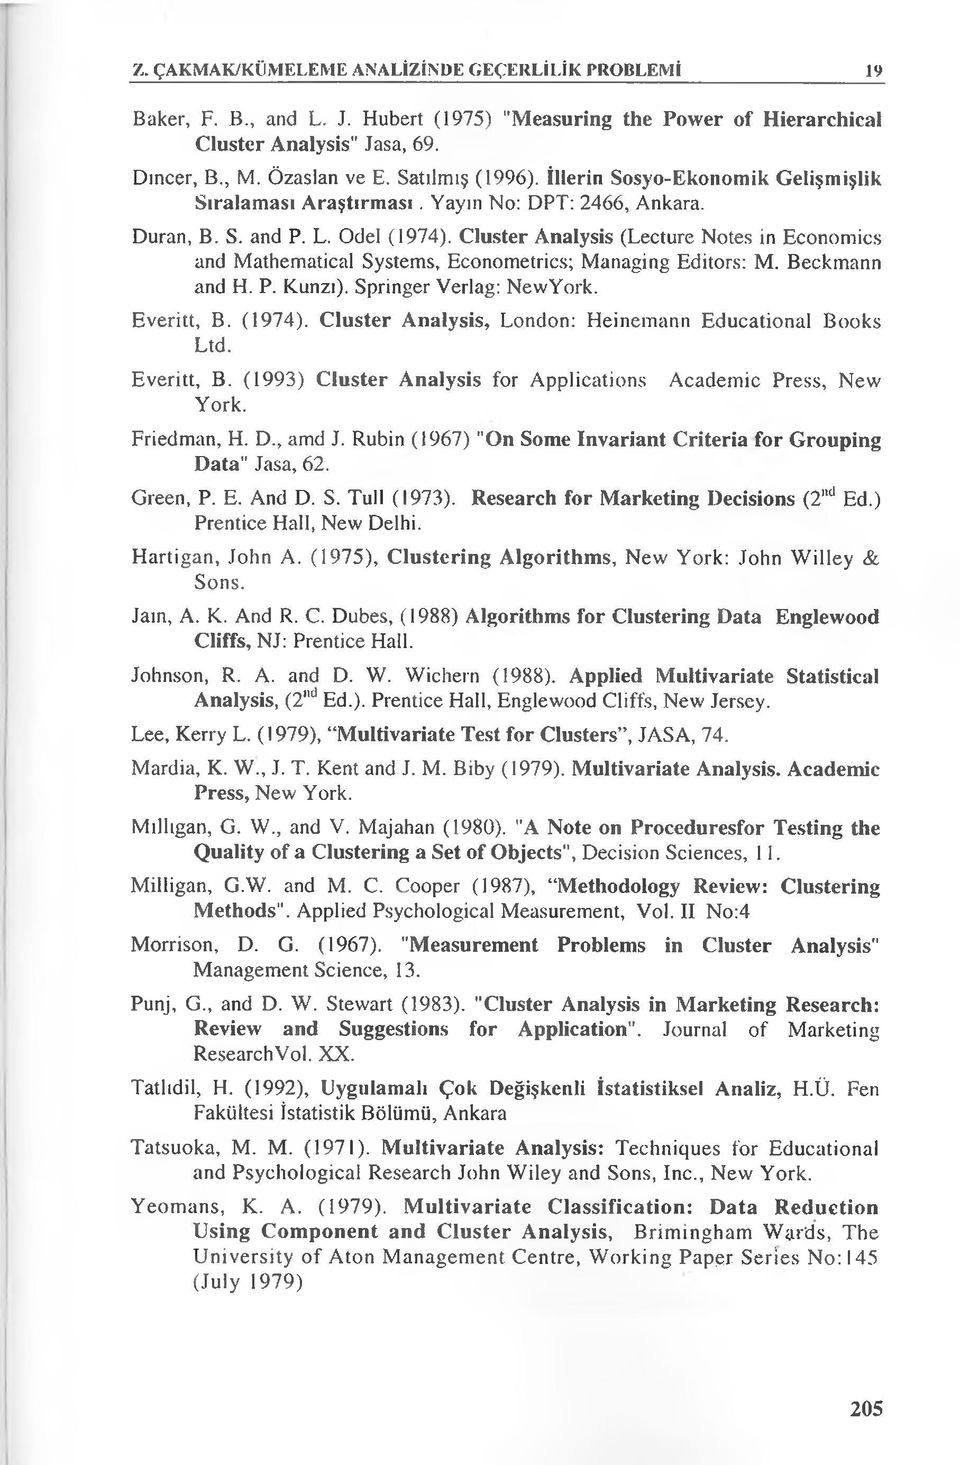 Cluster Analysis (Lecture Notes in Economics and Mathematical Systems, Econometrics; Managing Editors: M. Beckmann and H. P. Kunzf). Springer Verlag: NevvYork. Everitt, B. (1974).